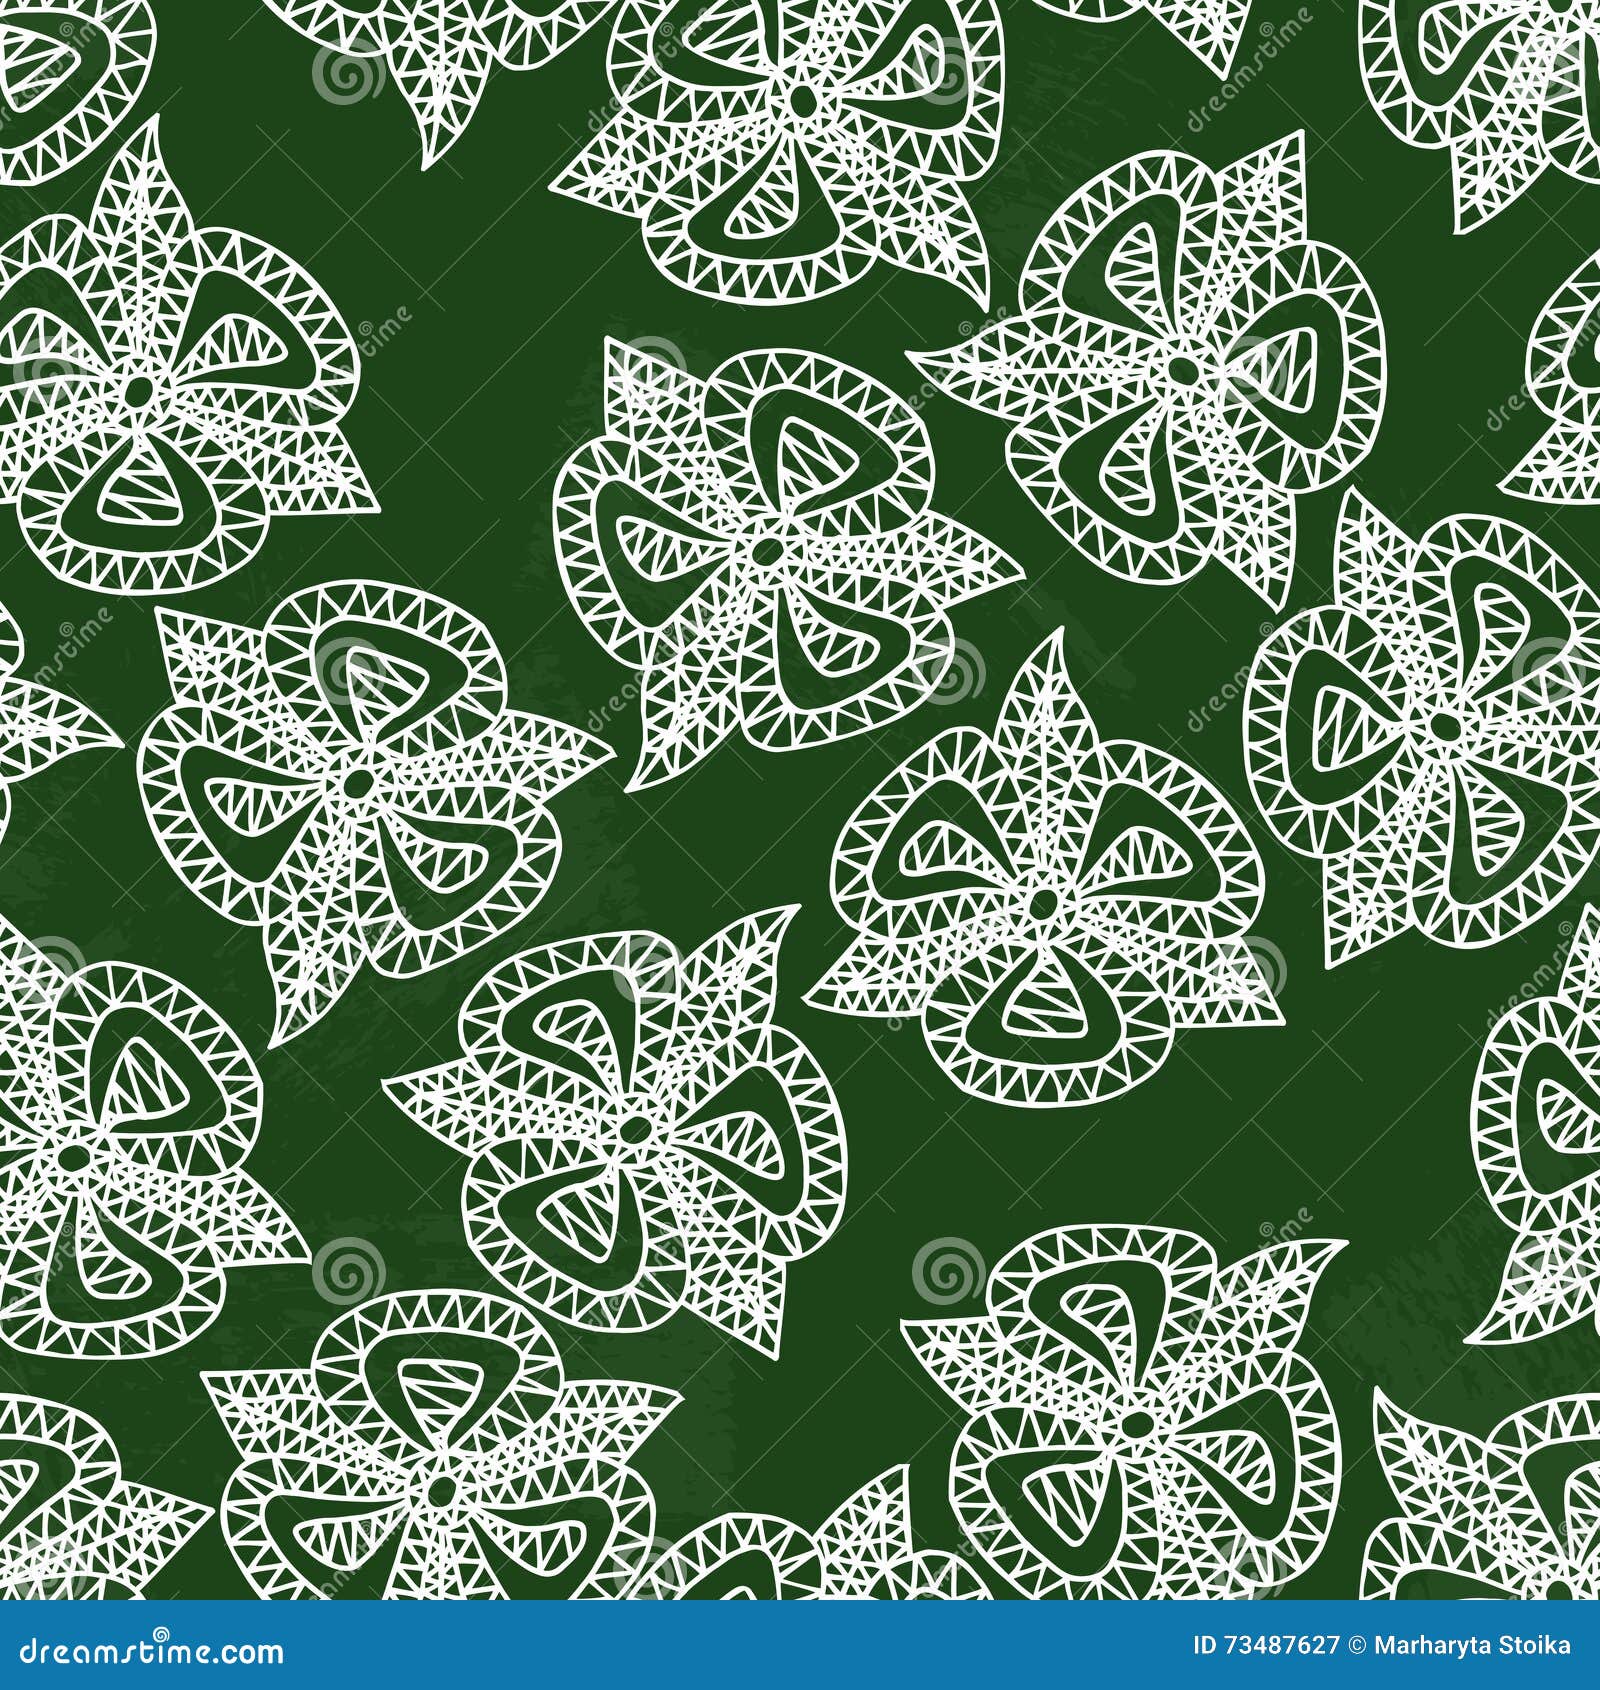 Download Flowers Drawn A Piece Of Chalk On A Green Board. Floral Print. Seamless Pattern Vector ...